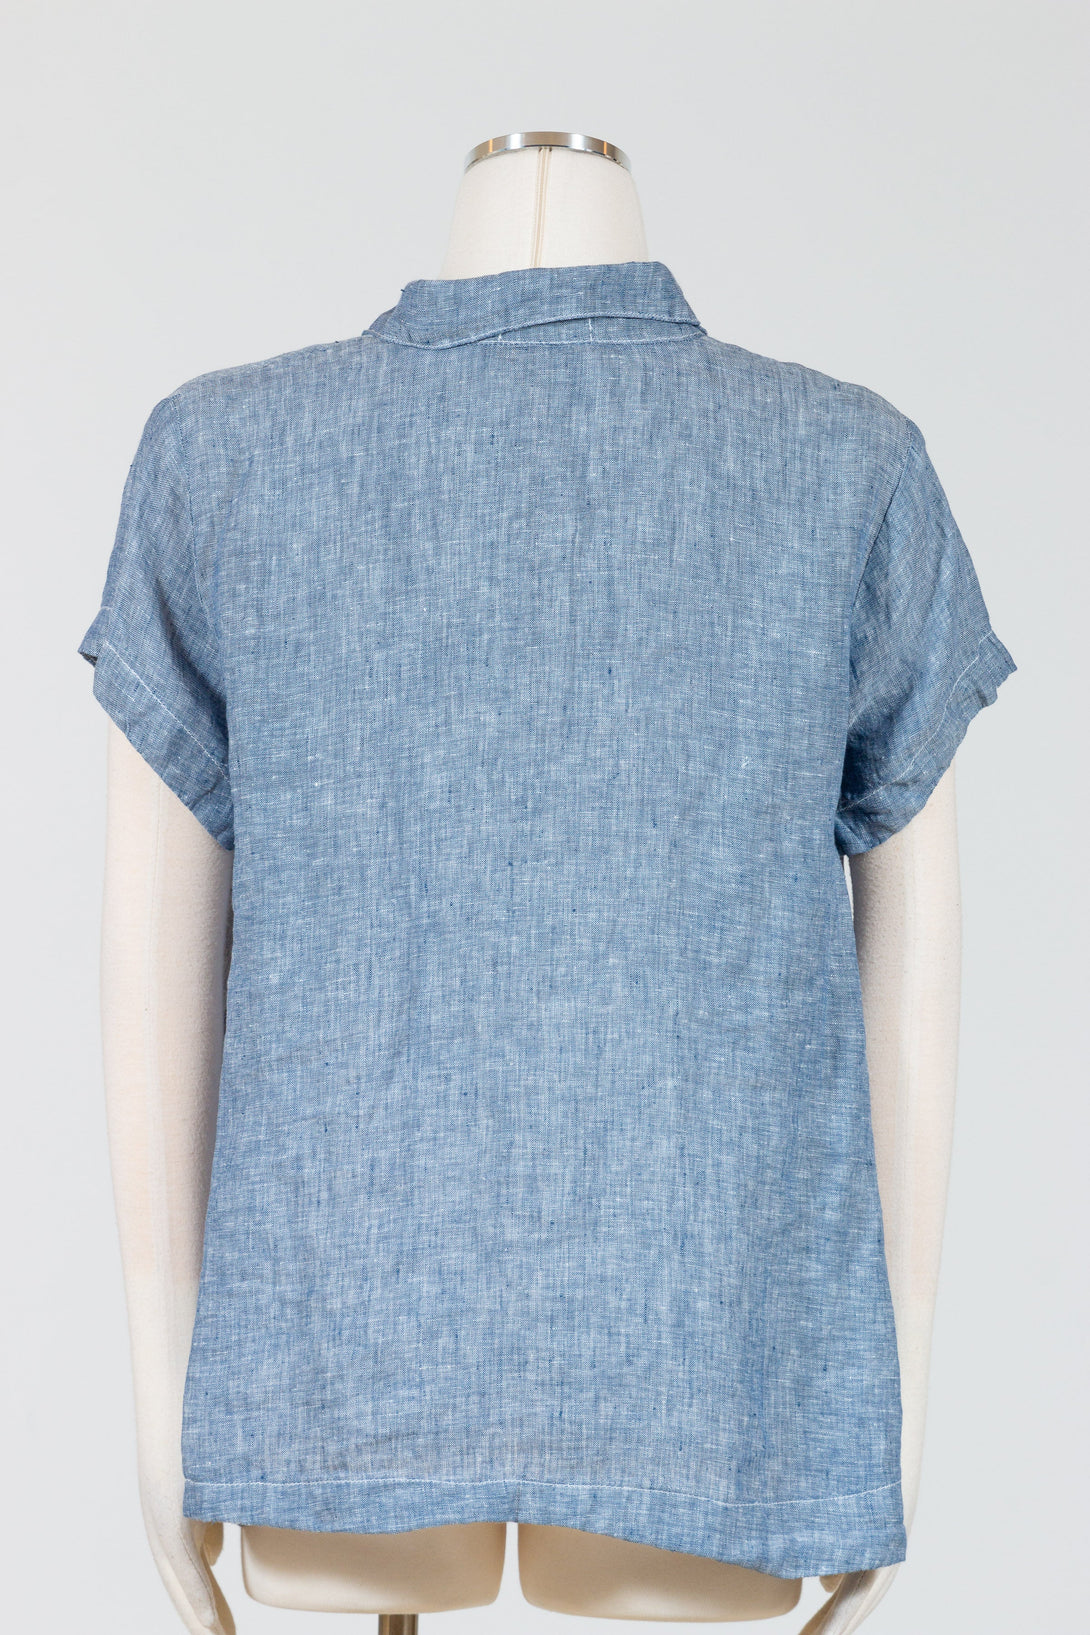 CP Shades Peek Top is a collared cap sleeve linen top, with a button placket with an A-line silhouette that skims the hips with a slightly curved hemline. 